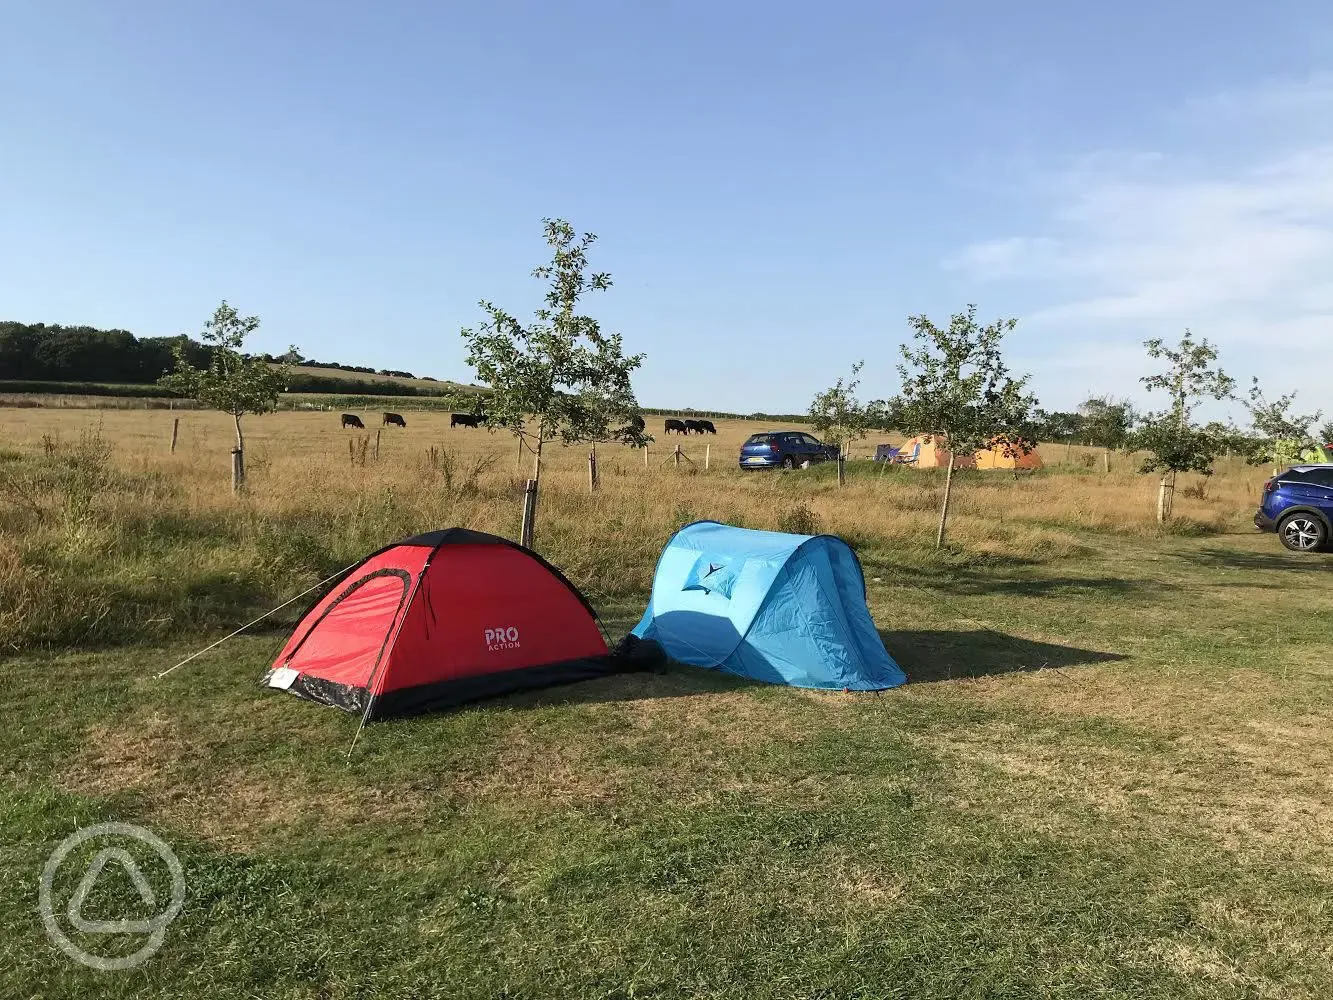 Tents pitched